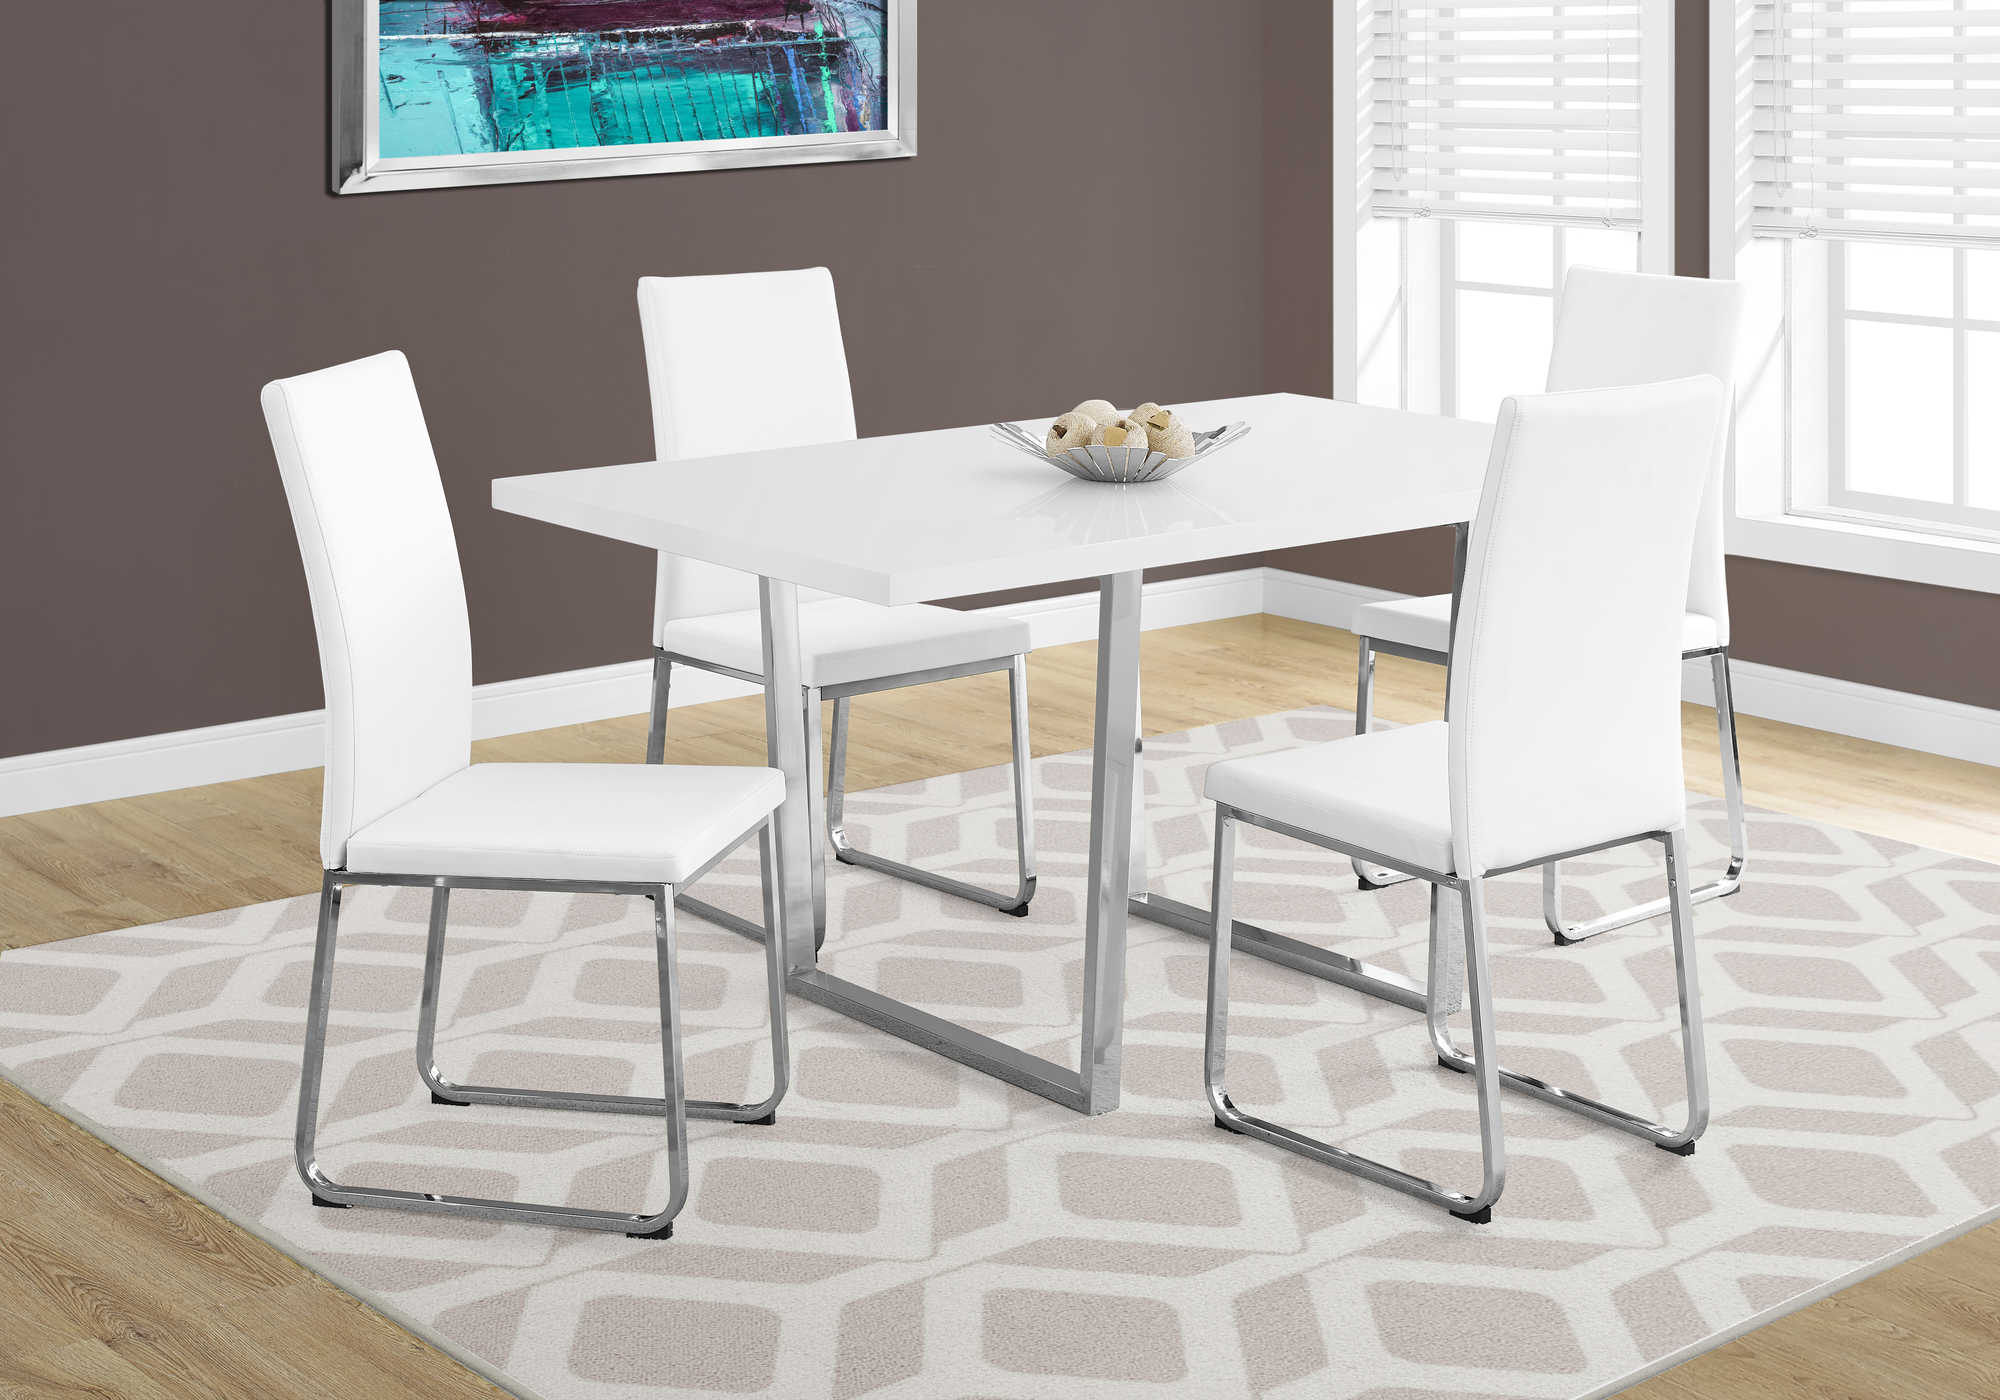 DINING TABLE - 36"X 60" / WHITE GLOSSY / CHROME METAL